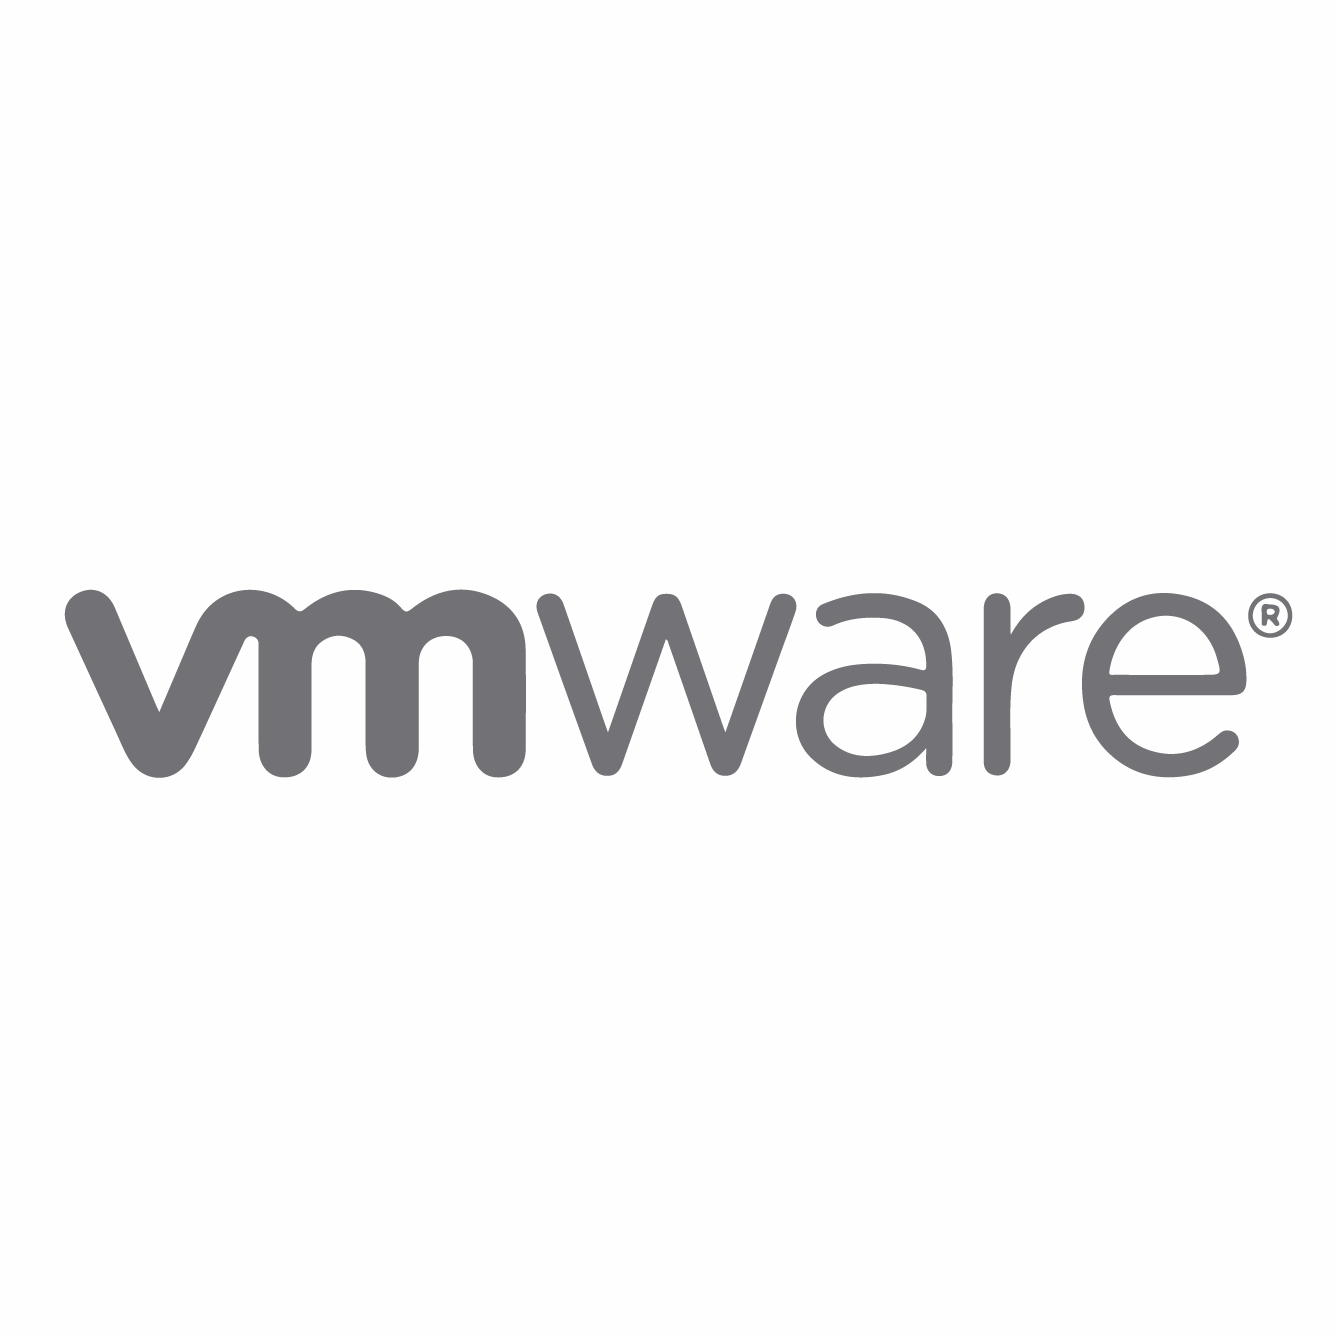 https://securetech.ae/wp-content/uploads/2019/02/11.VMWARE.png